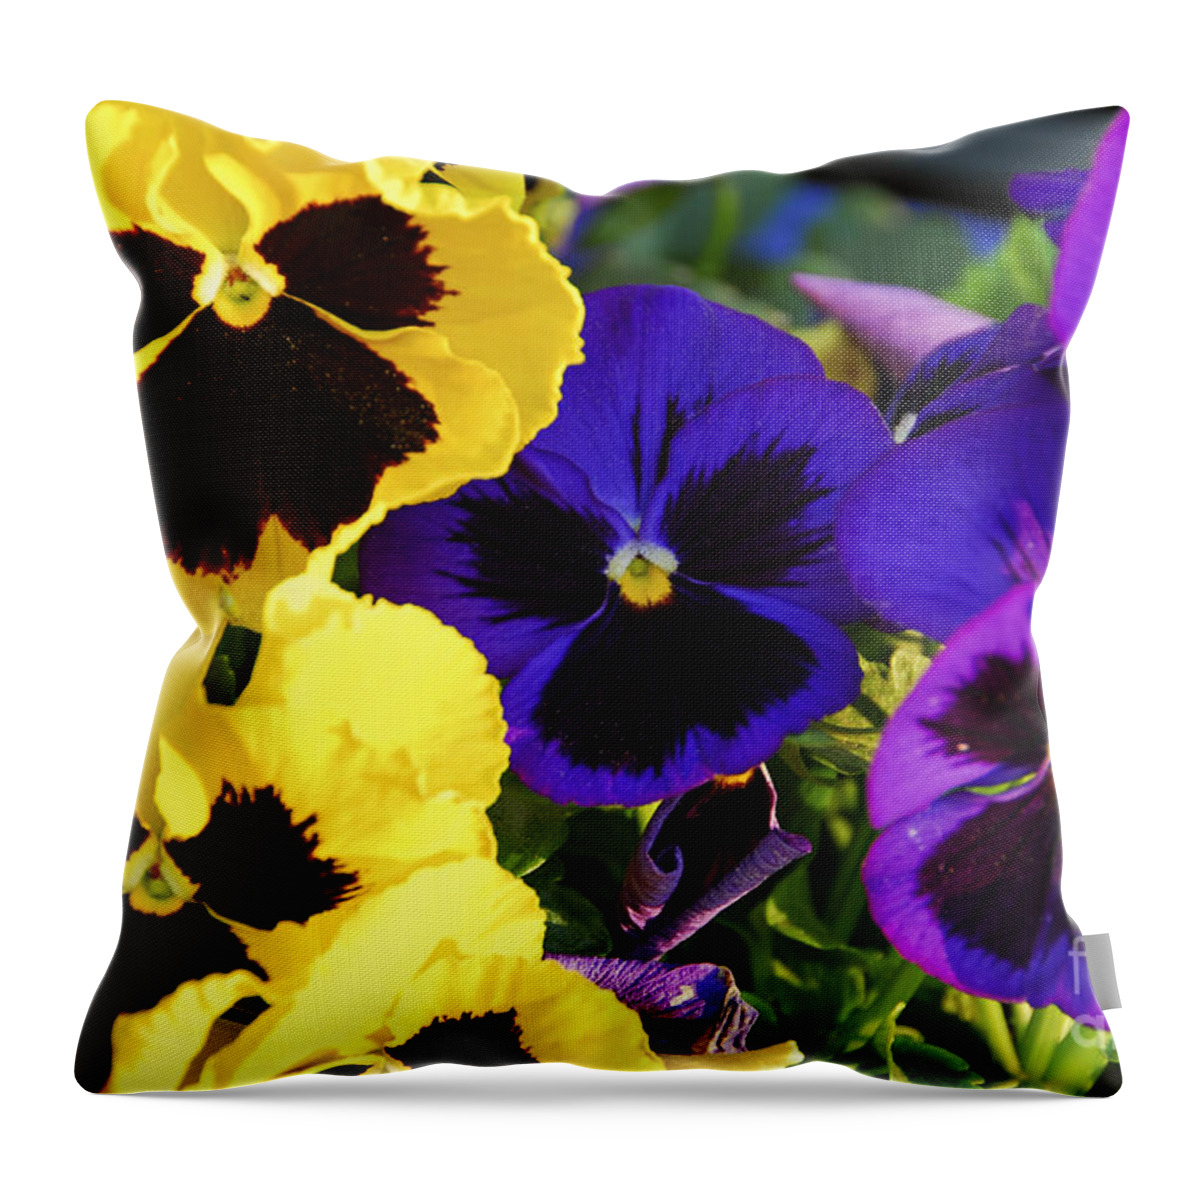 Pansies Throw Pillow featuring the photograph Pansies 2 by Elena Elisseeva